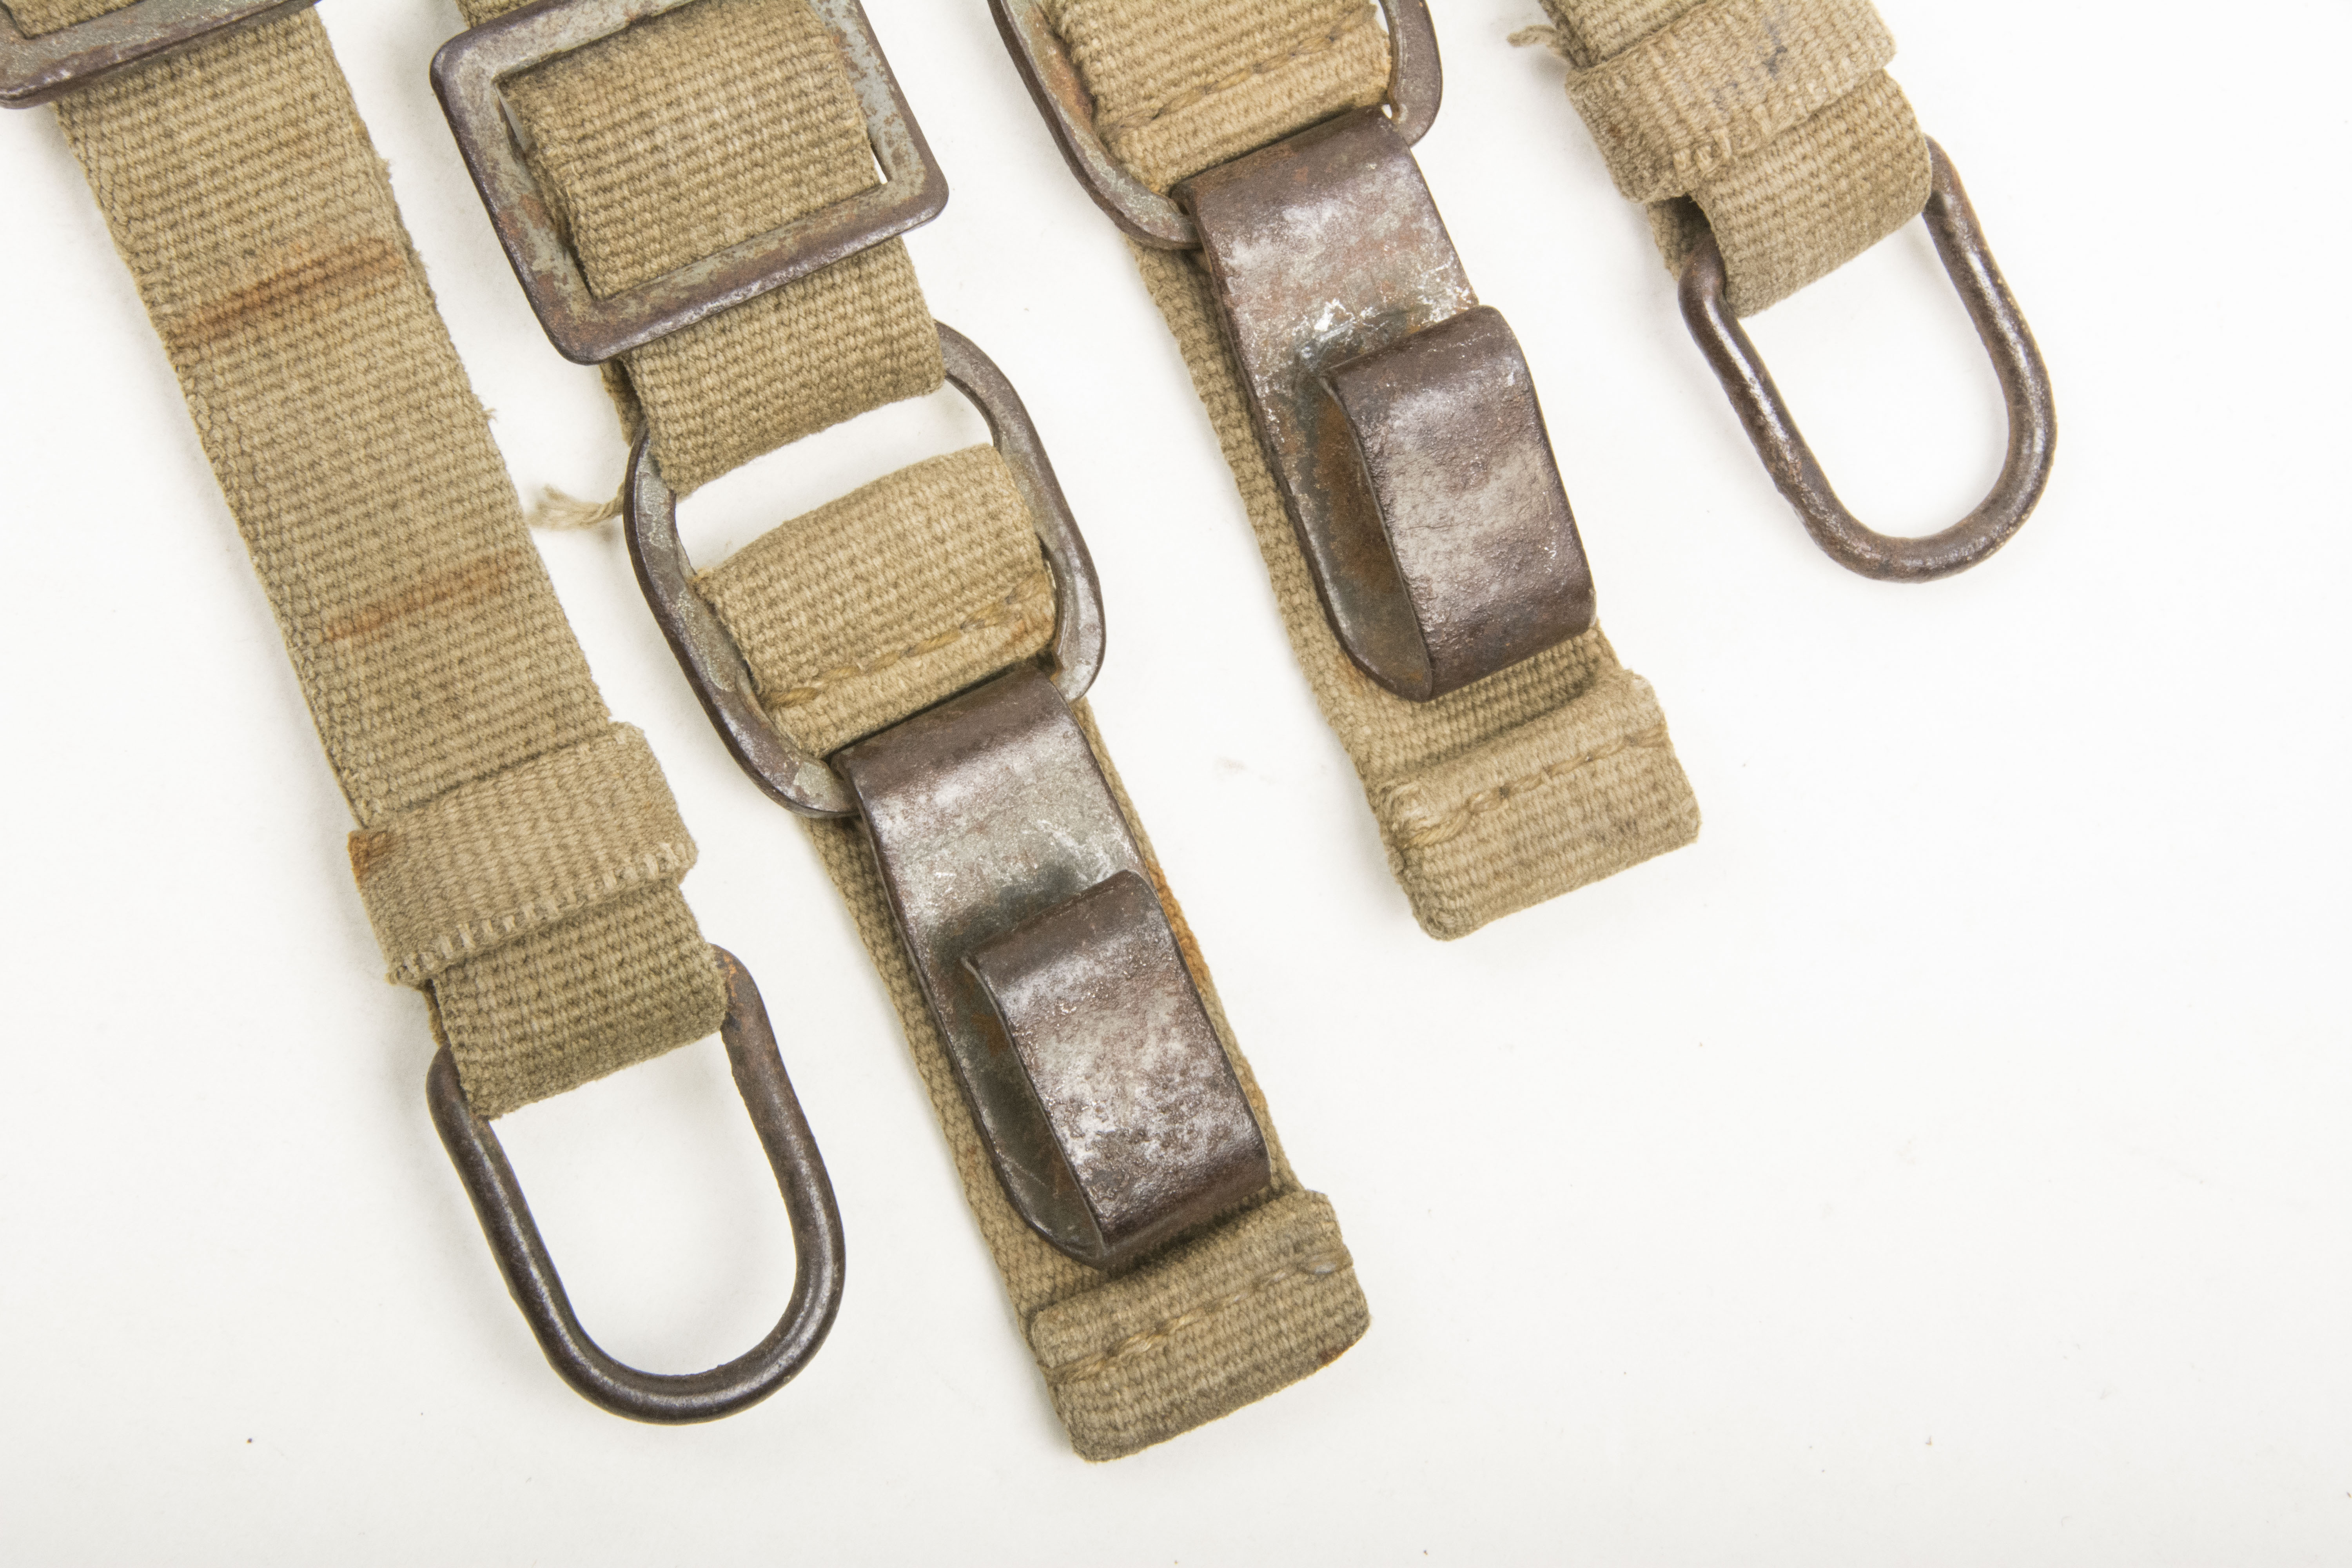 Canvas Y-straps in combat used condition marked gjl 1942 – fjm44